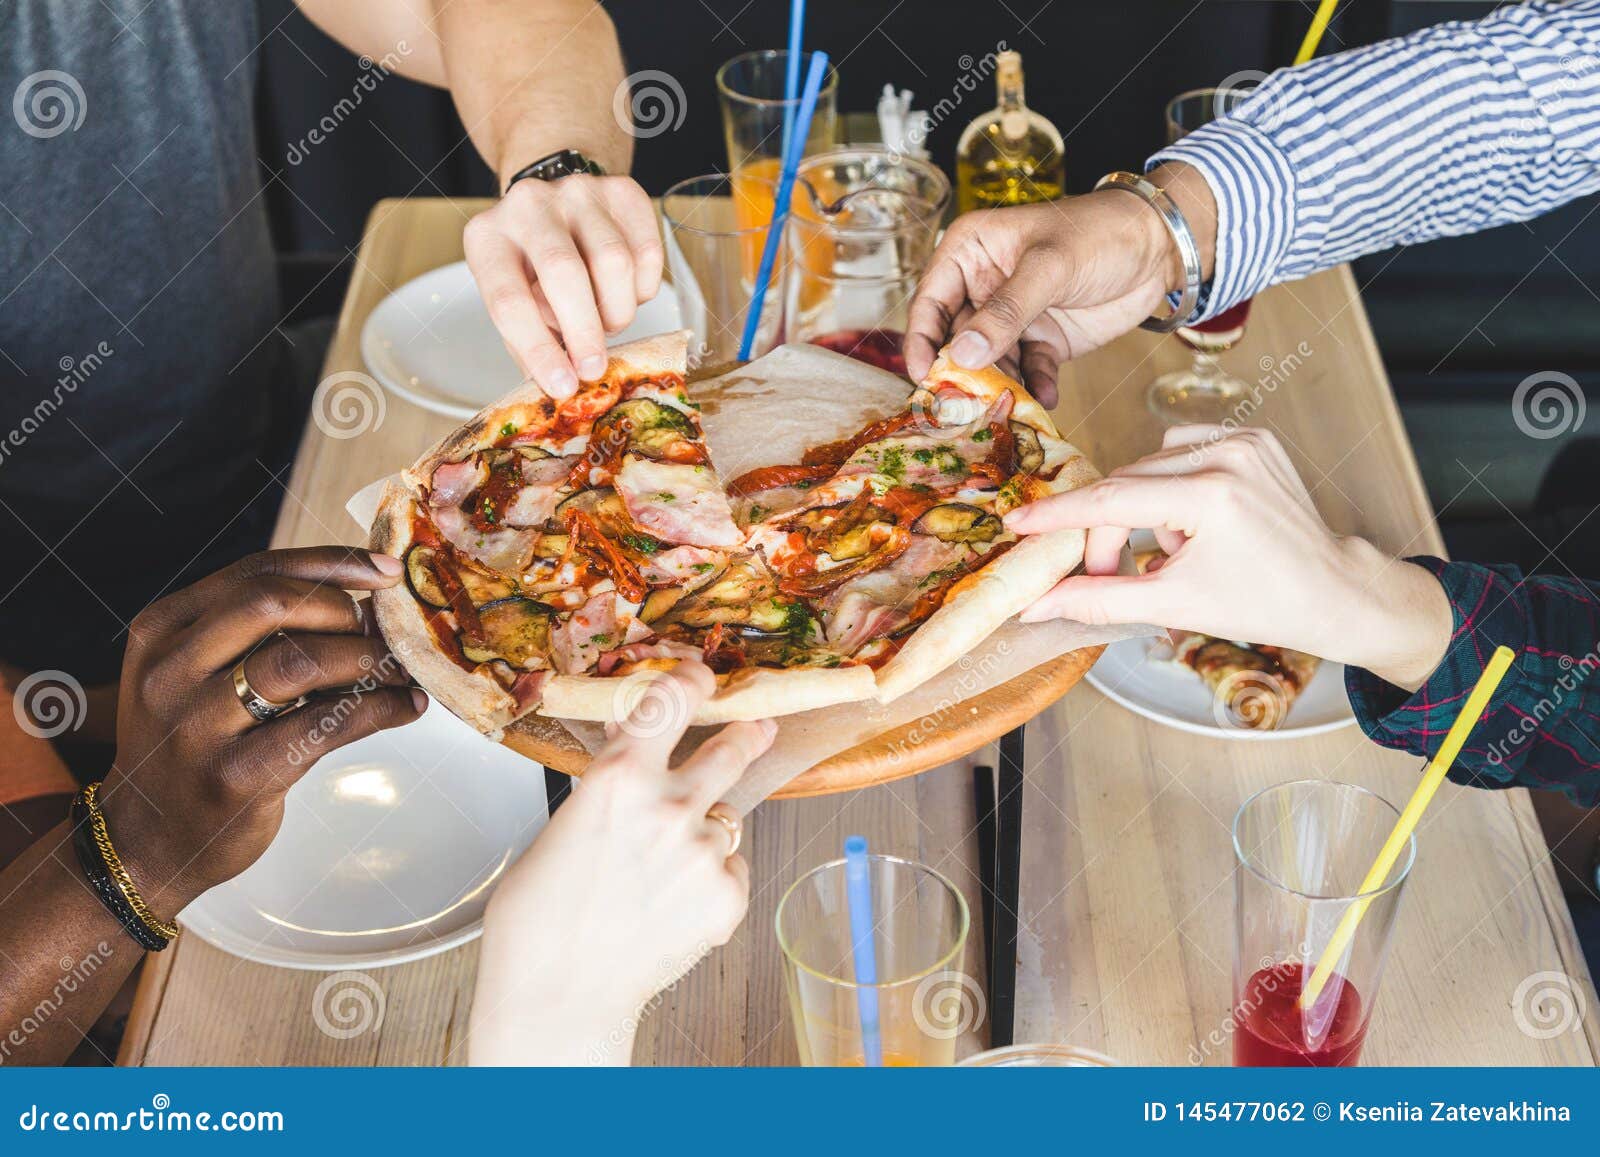 A company of multicultural young people in a cafe eating pizza, drinking cocktails, having fun.